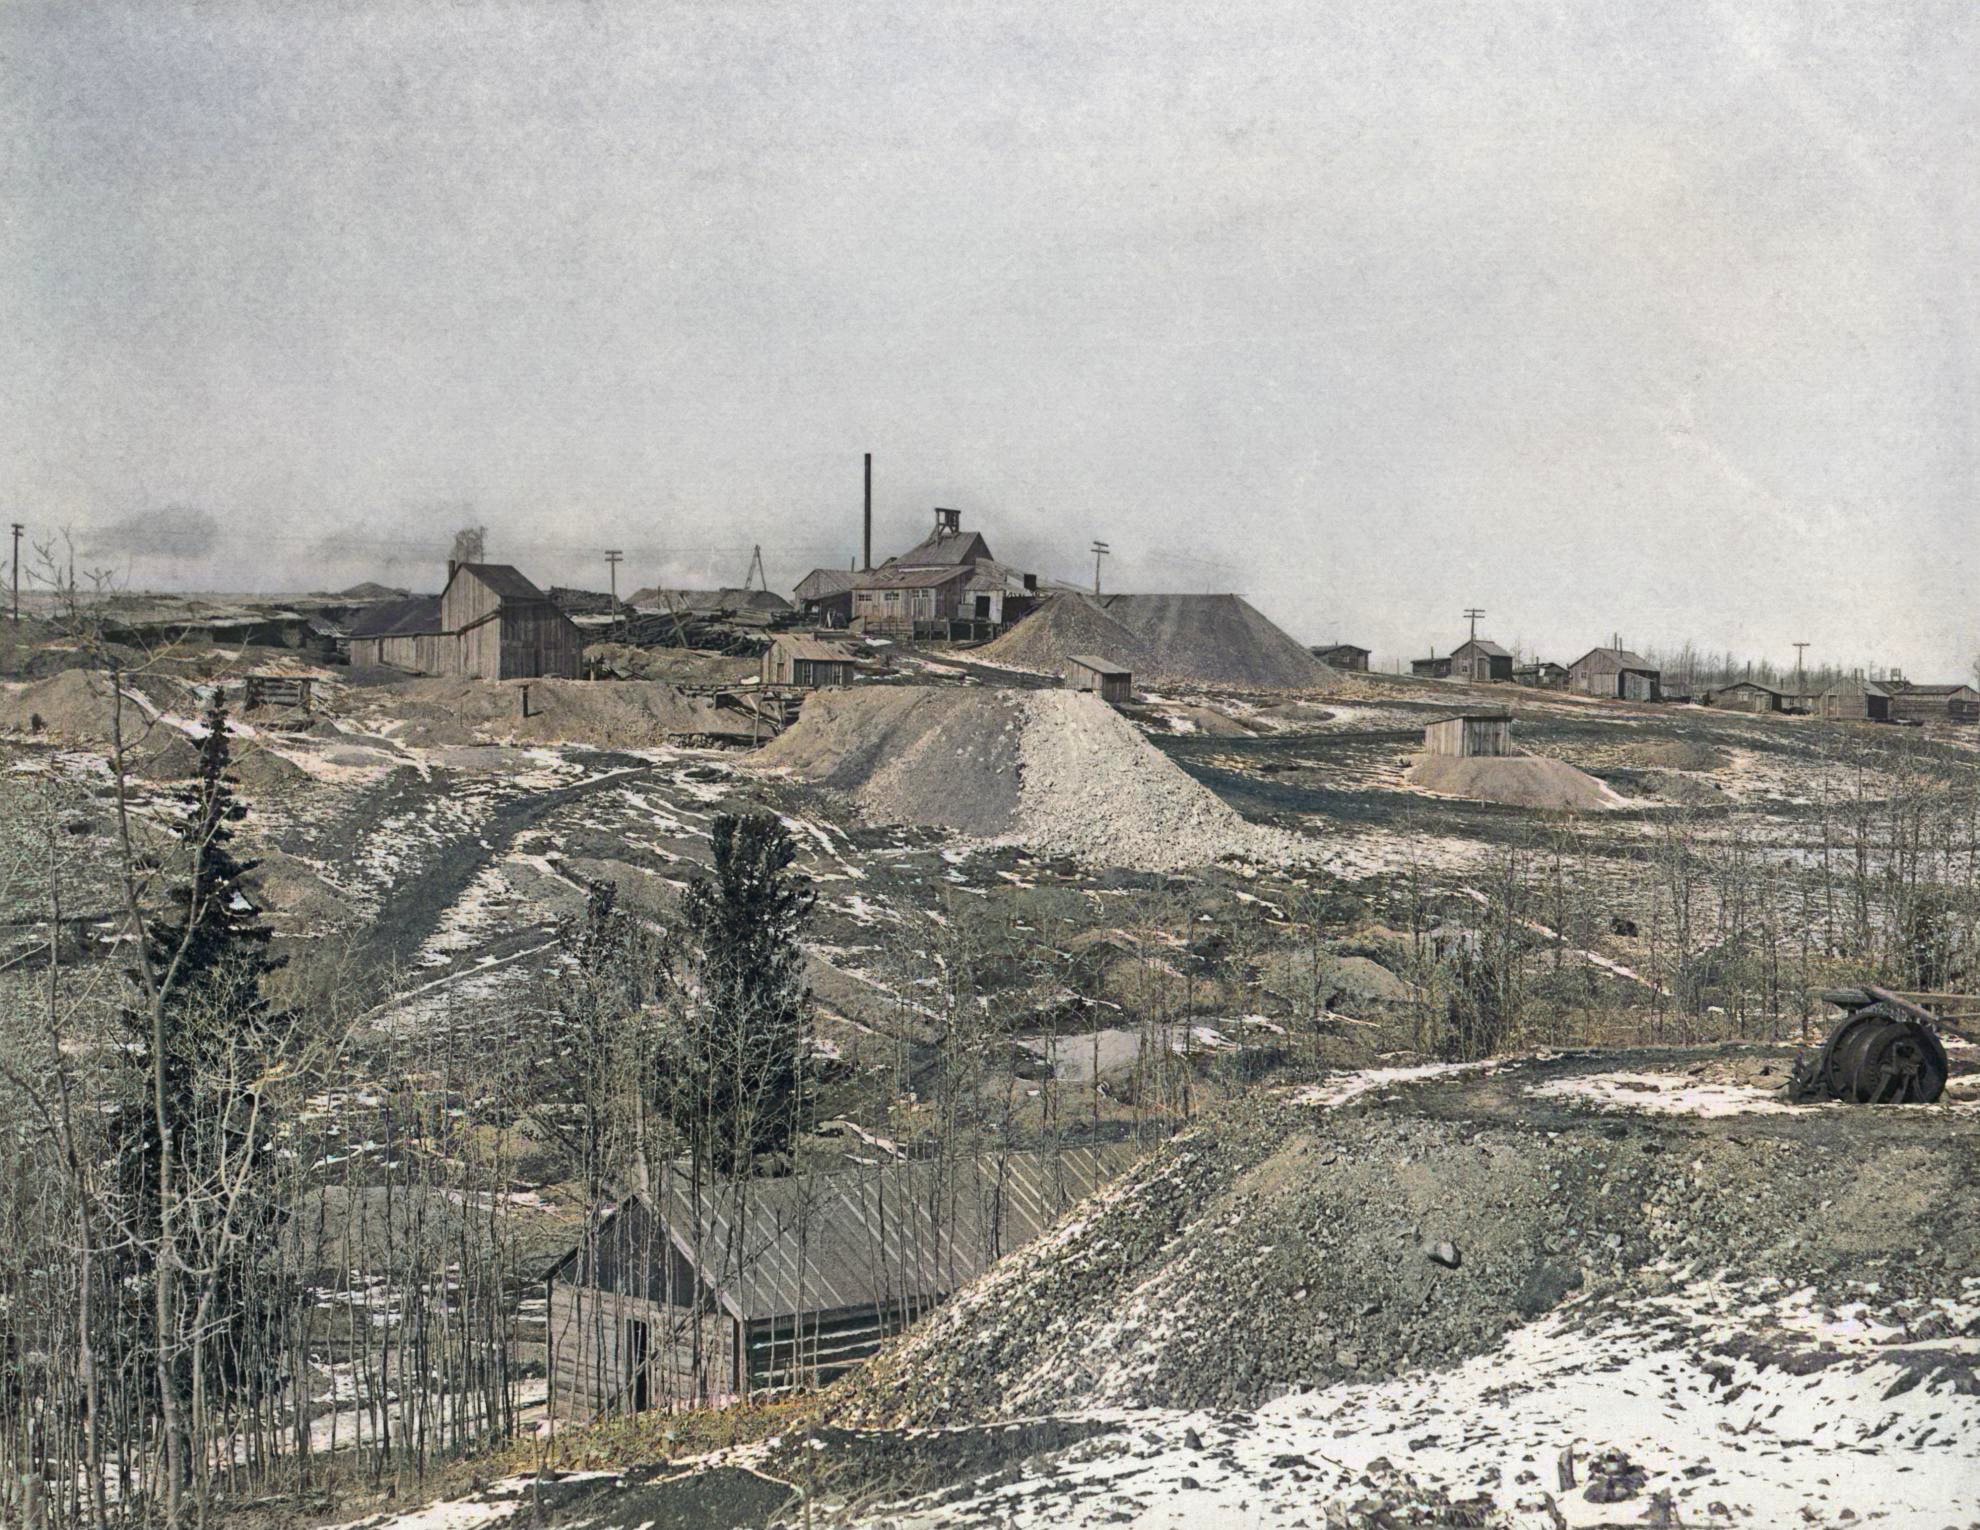    This DPL view (Call No. P-2014) are taken from Ironclad Hill, most likely in 1895 or early 1896. Wintertime as there are pieces of snow on the ground. It appears also in an 1896 book which helps date it somehow.
   In the foreground there is a longer Log based structure I feel is the same Deerhorn Mine Boarding House as I have in another picture in my collection (P-02433), while in the background is the top of Globe Hill with its small community called Summit in my 1903 USGS topographic map, and showing the Deerhorn and Summit Mines as per title in the 1896 book.
   About 1/3 down from top and the left most structure is the Shaft House of the Deer Horn, or Deerhorn mine, making then the one near center of the view the Summit mine operation, but which claim that is on is hard to tell as several claims belonging to the Summit Mining and Milling Company. To the right climbing the hill is the various Log and frame houses of miners and their families. In foreground right some mining machinery is seen on a dump that I think is one of the Plymouth Rock claims.
   I did procure the colored version of this image. Source was grayish, or in common speech black & white. Used an online service and tweaked and worked with image to get what looks best to my eyes at the moment.